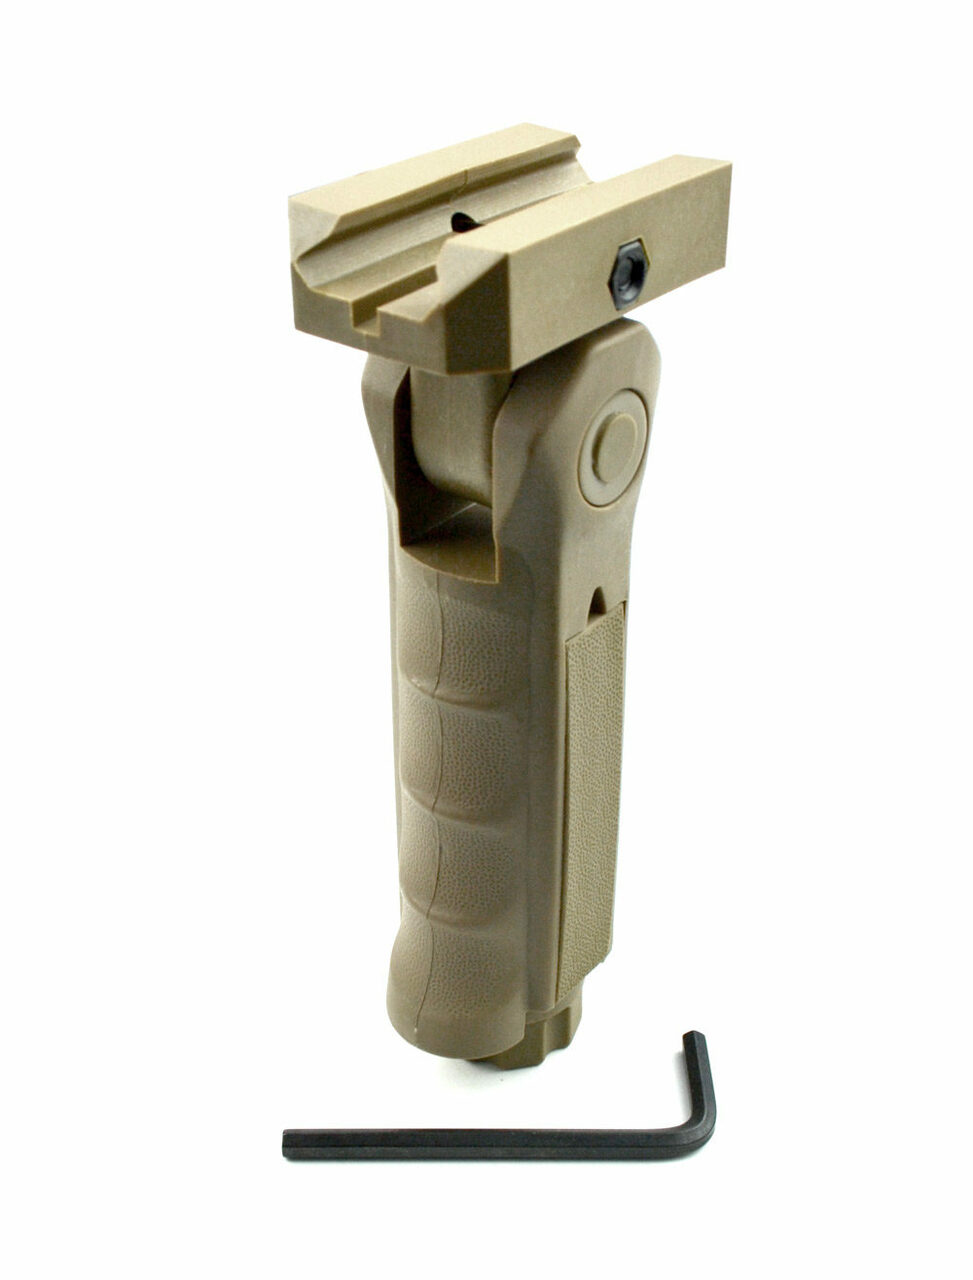 5 Position Folding Vertical Picatinny Foregrip